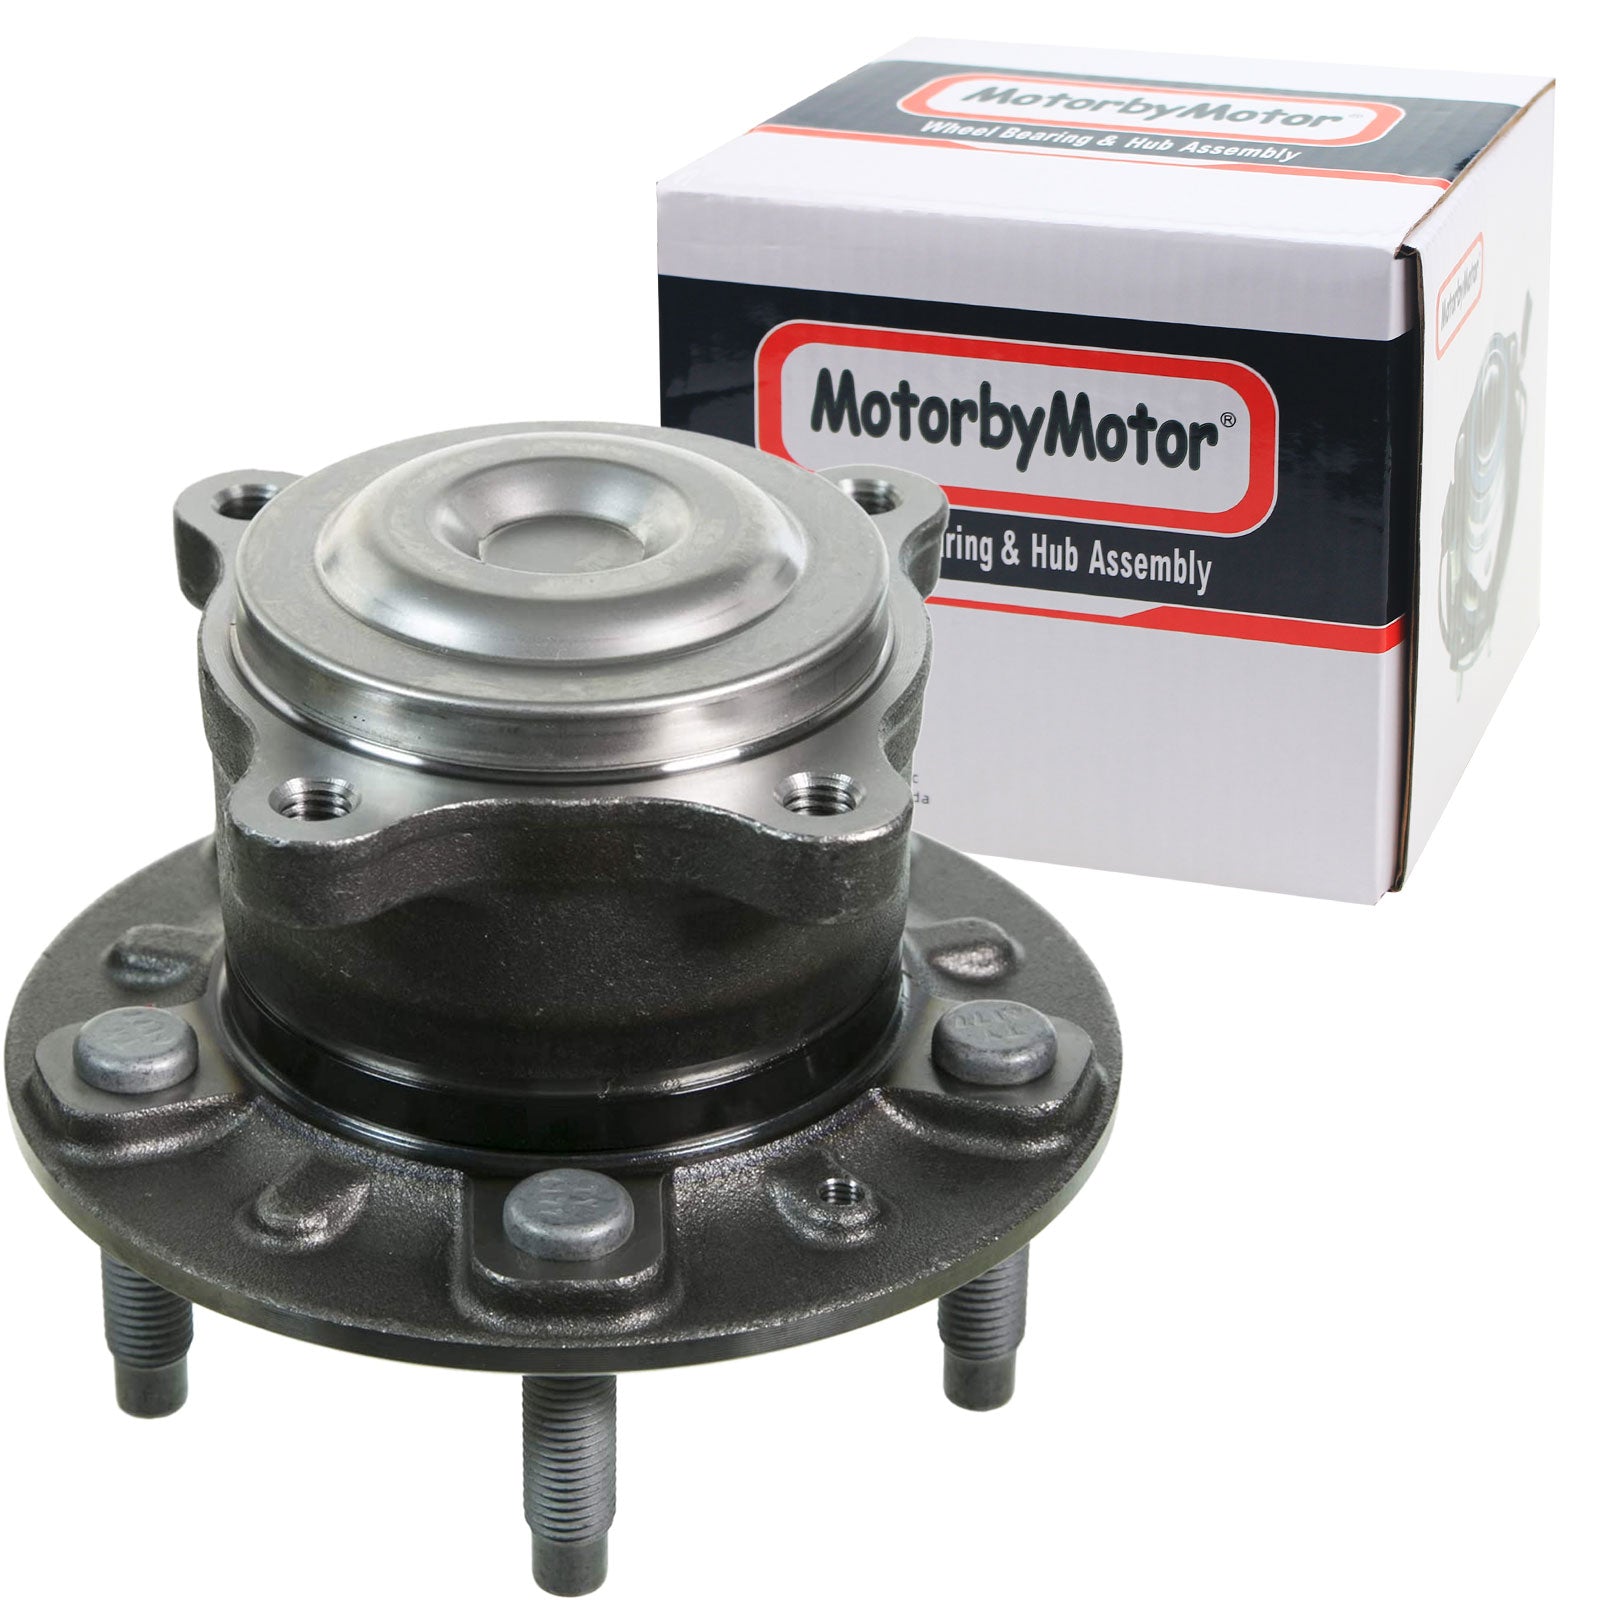 MotorbyMotor 512508 Rear Wheel Bearing and Hub Assembly with 5 Lugs fits for Buick Verano,Chevy Cruze,Chevy Volt Low-Runout OE Directly Replacement Hub Bearing MotorbyMotor